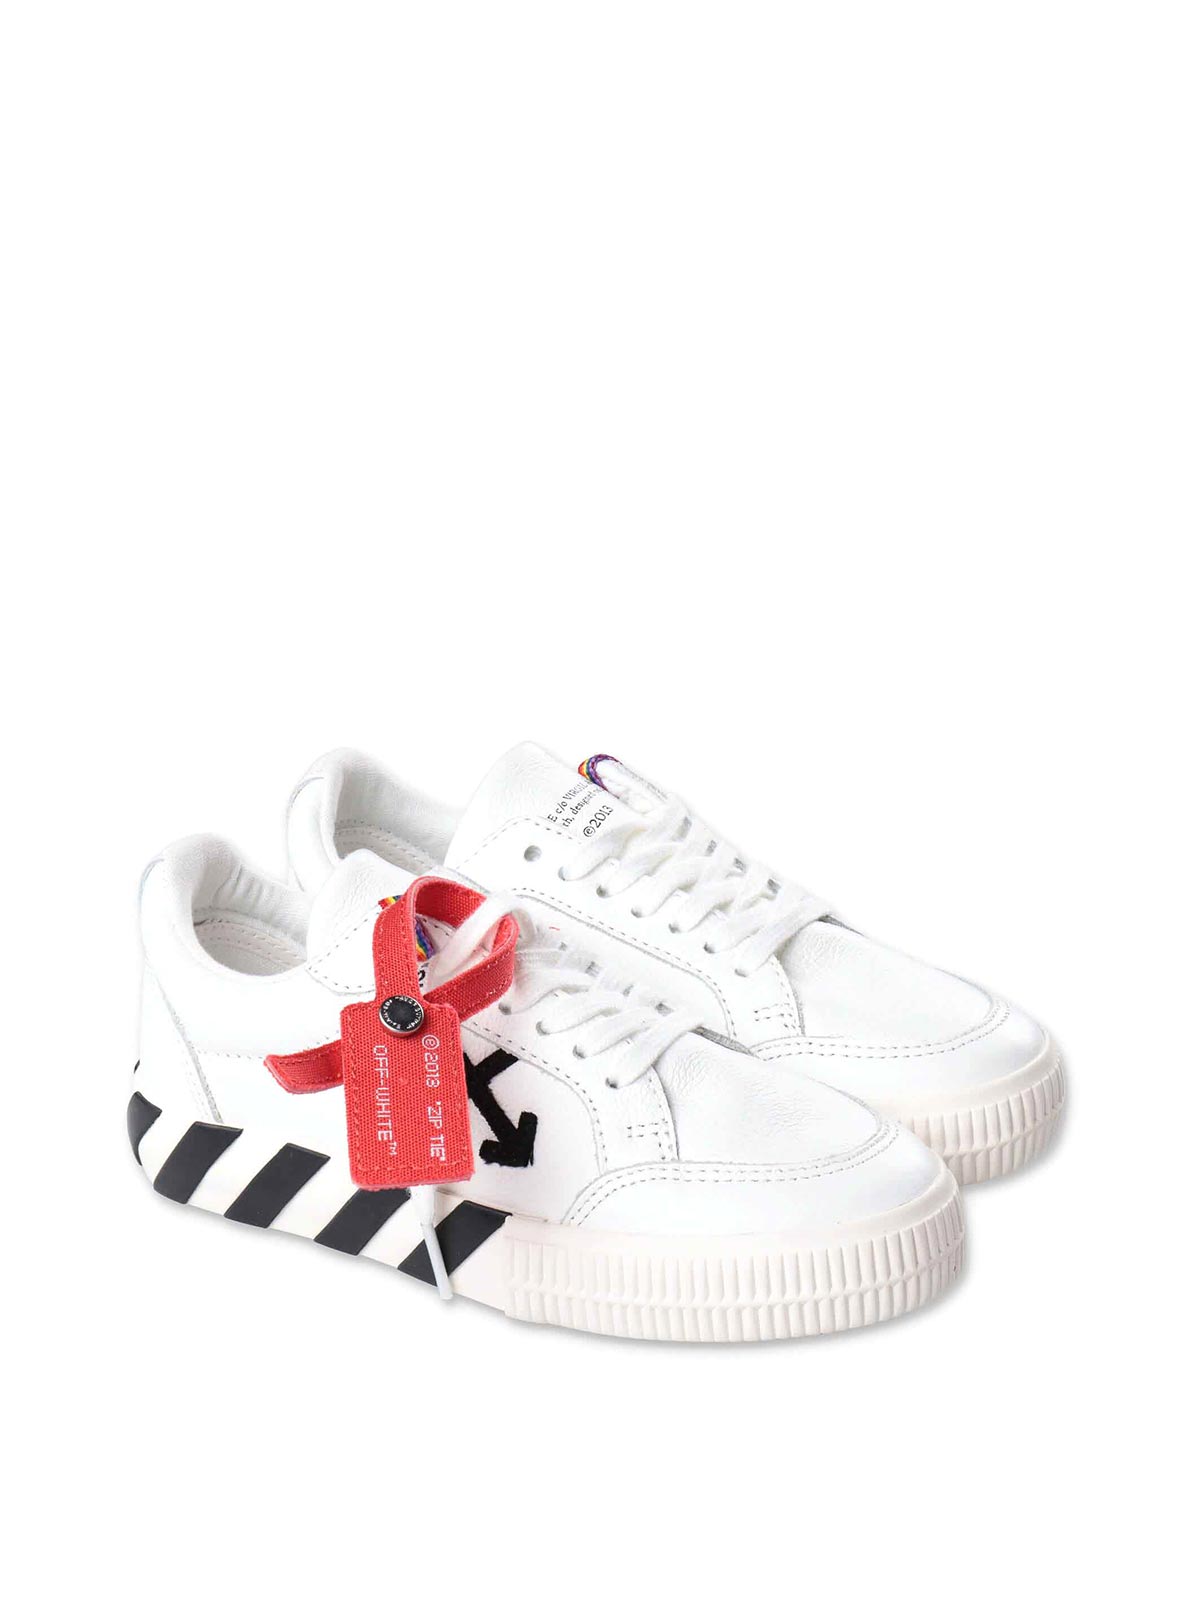 OFF-WHITE WHITE LEATHER BOY SNEAKERS